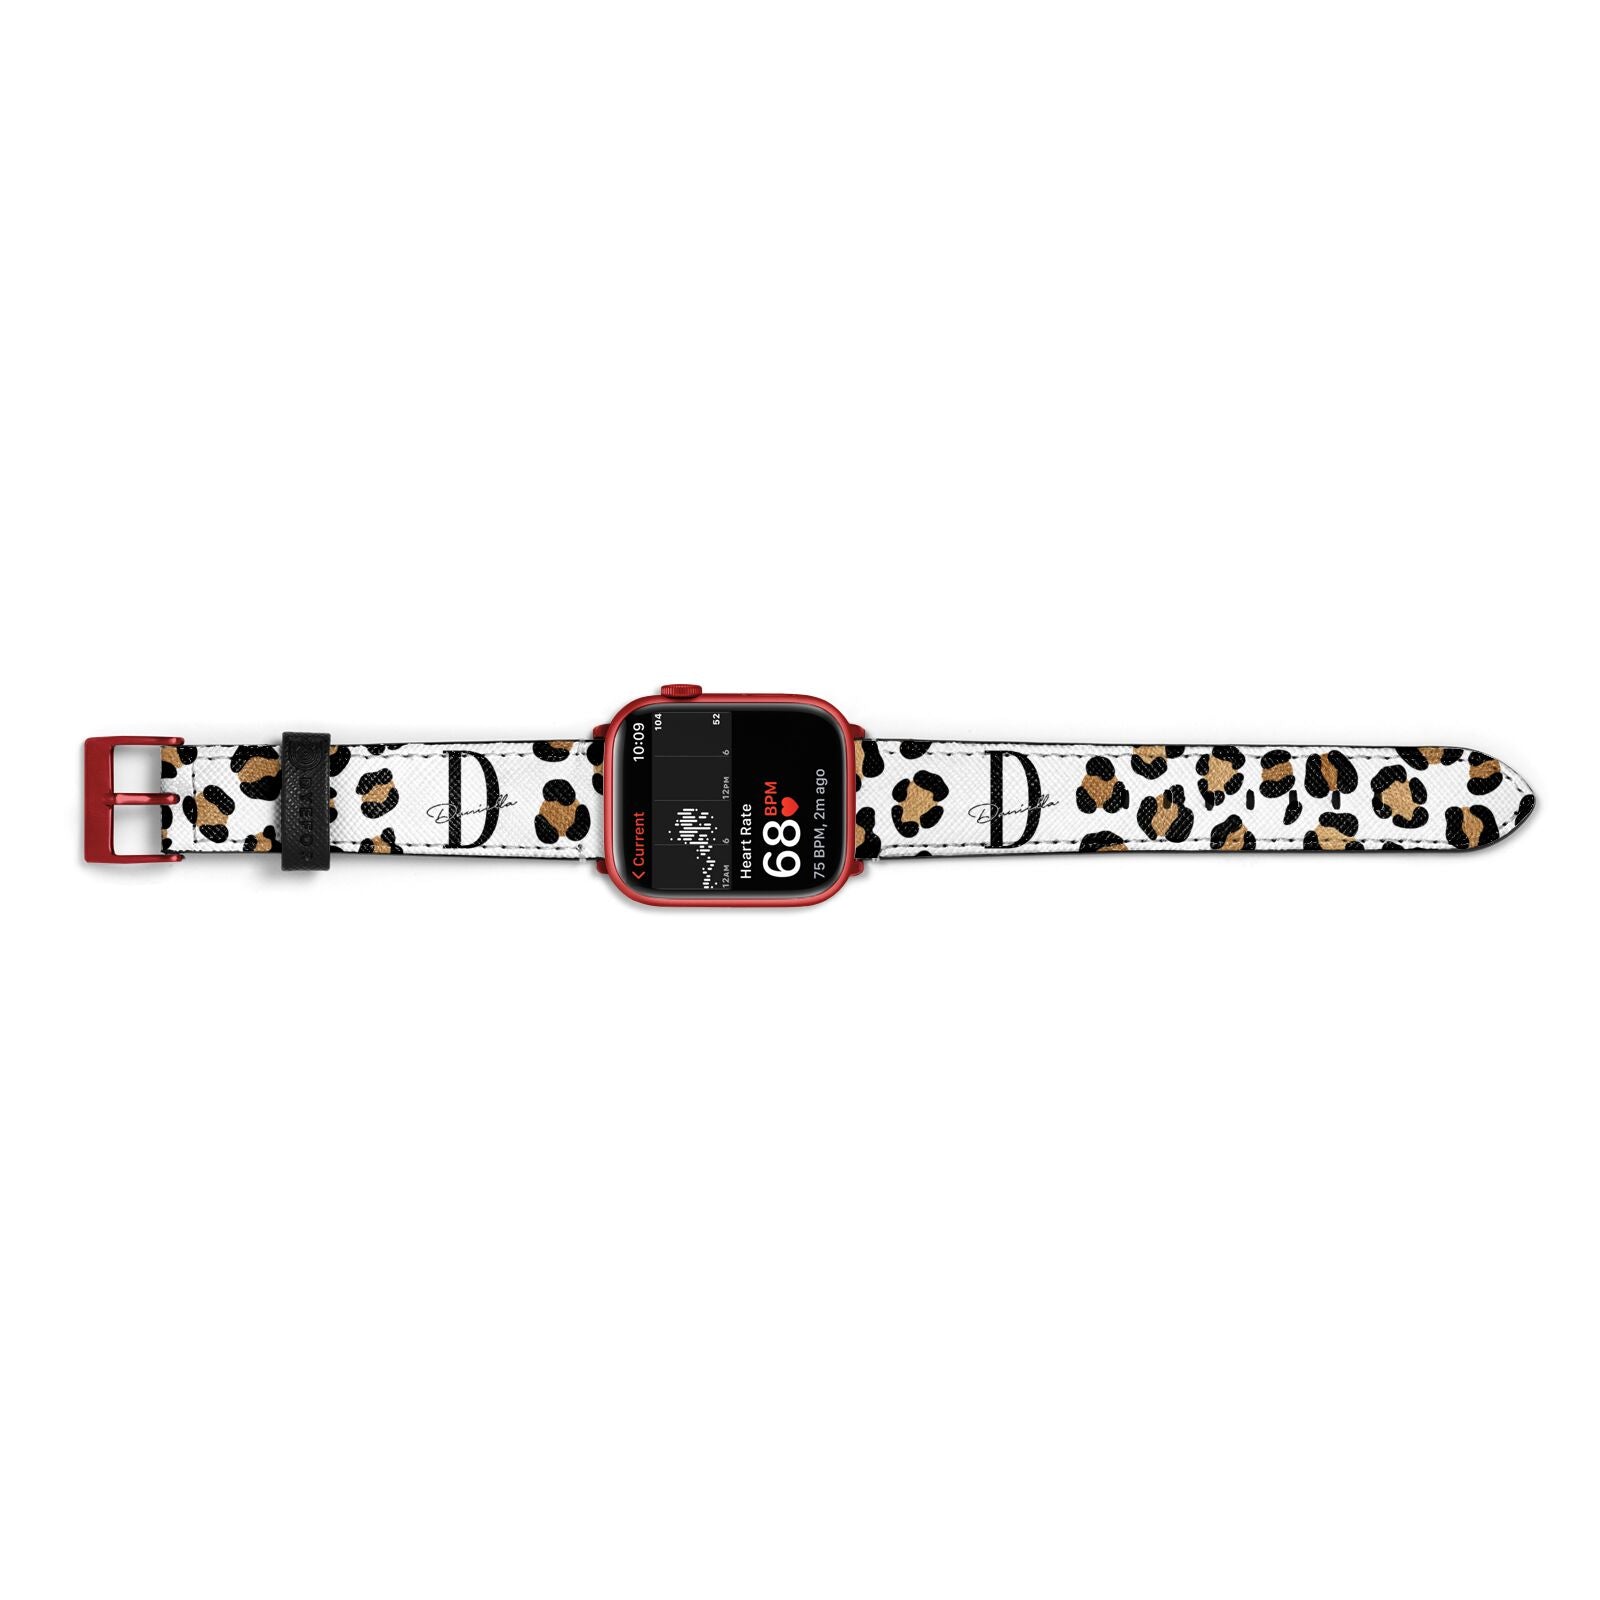 Personalised Leopard Print Apple Watch Strap Size 38mm Landscape Image Red Hardware